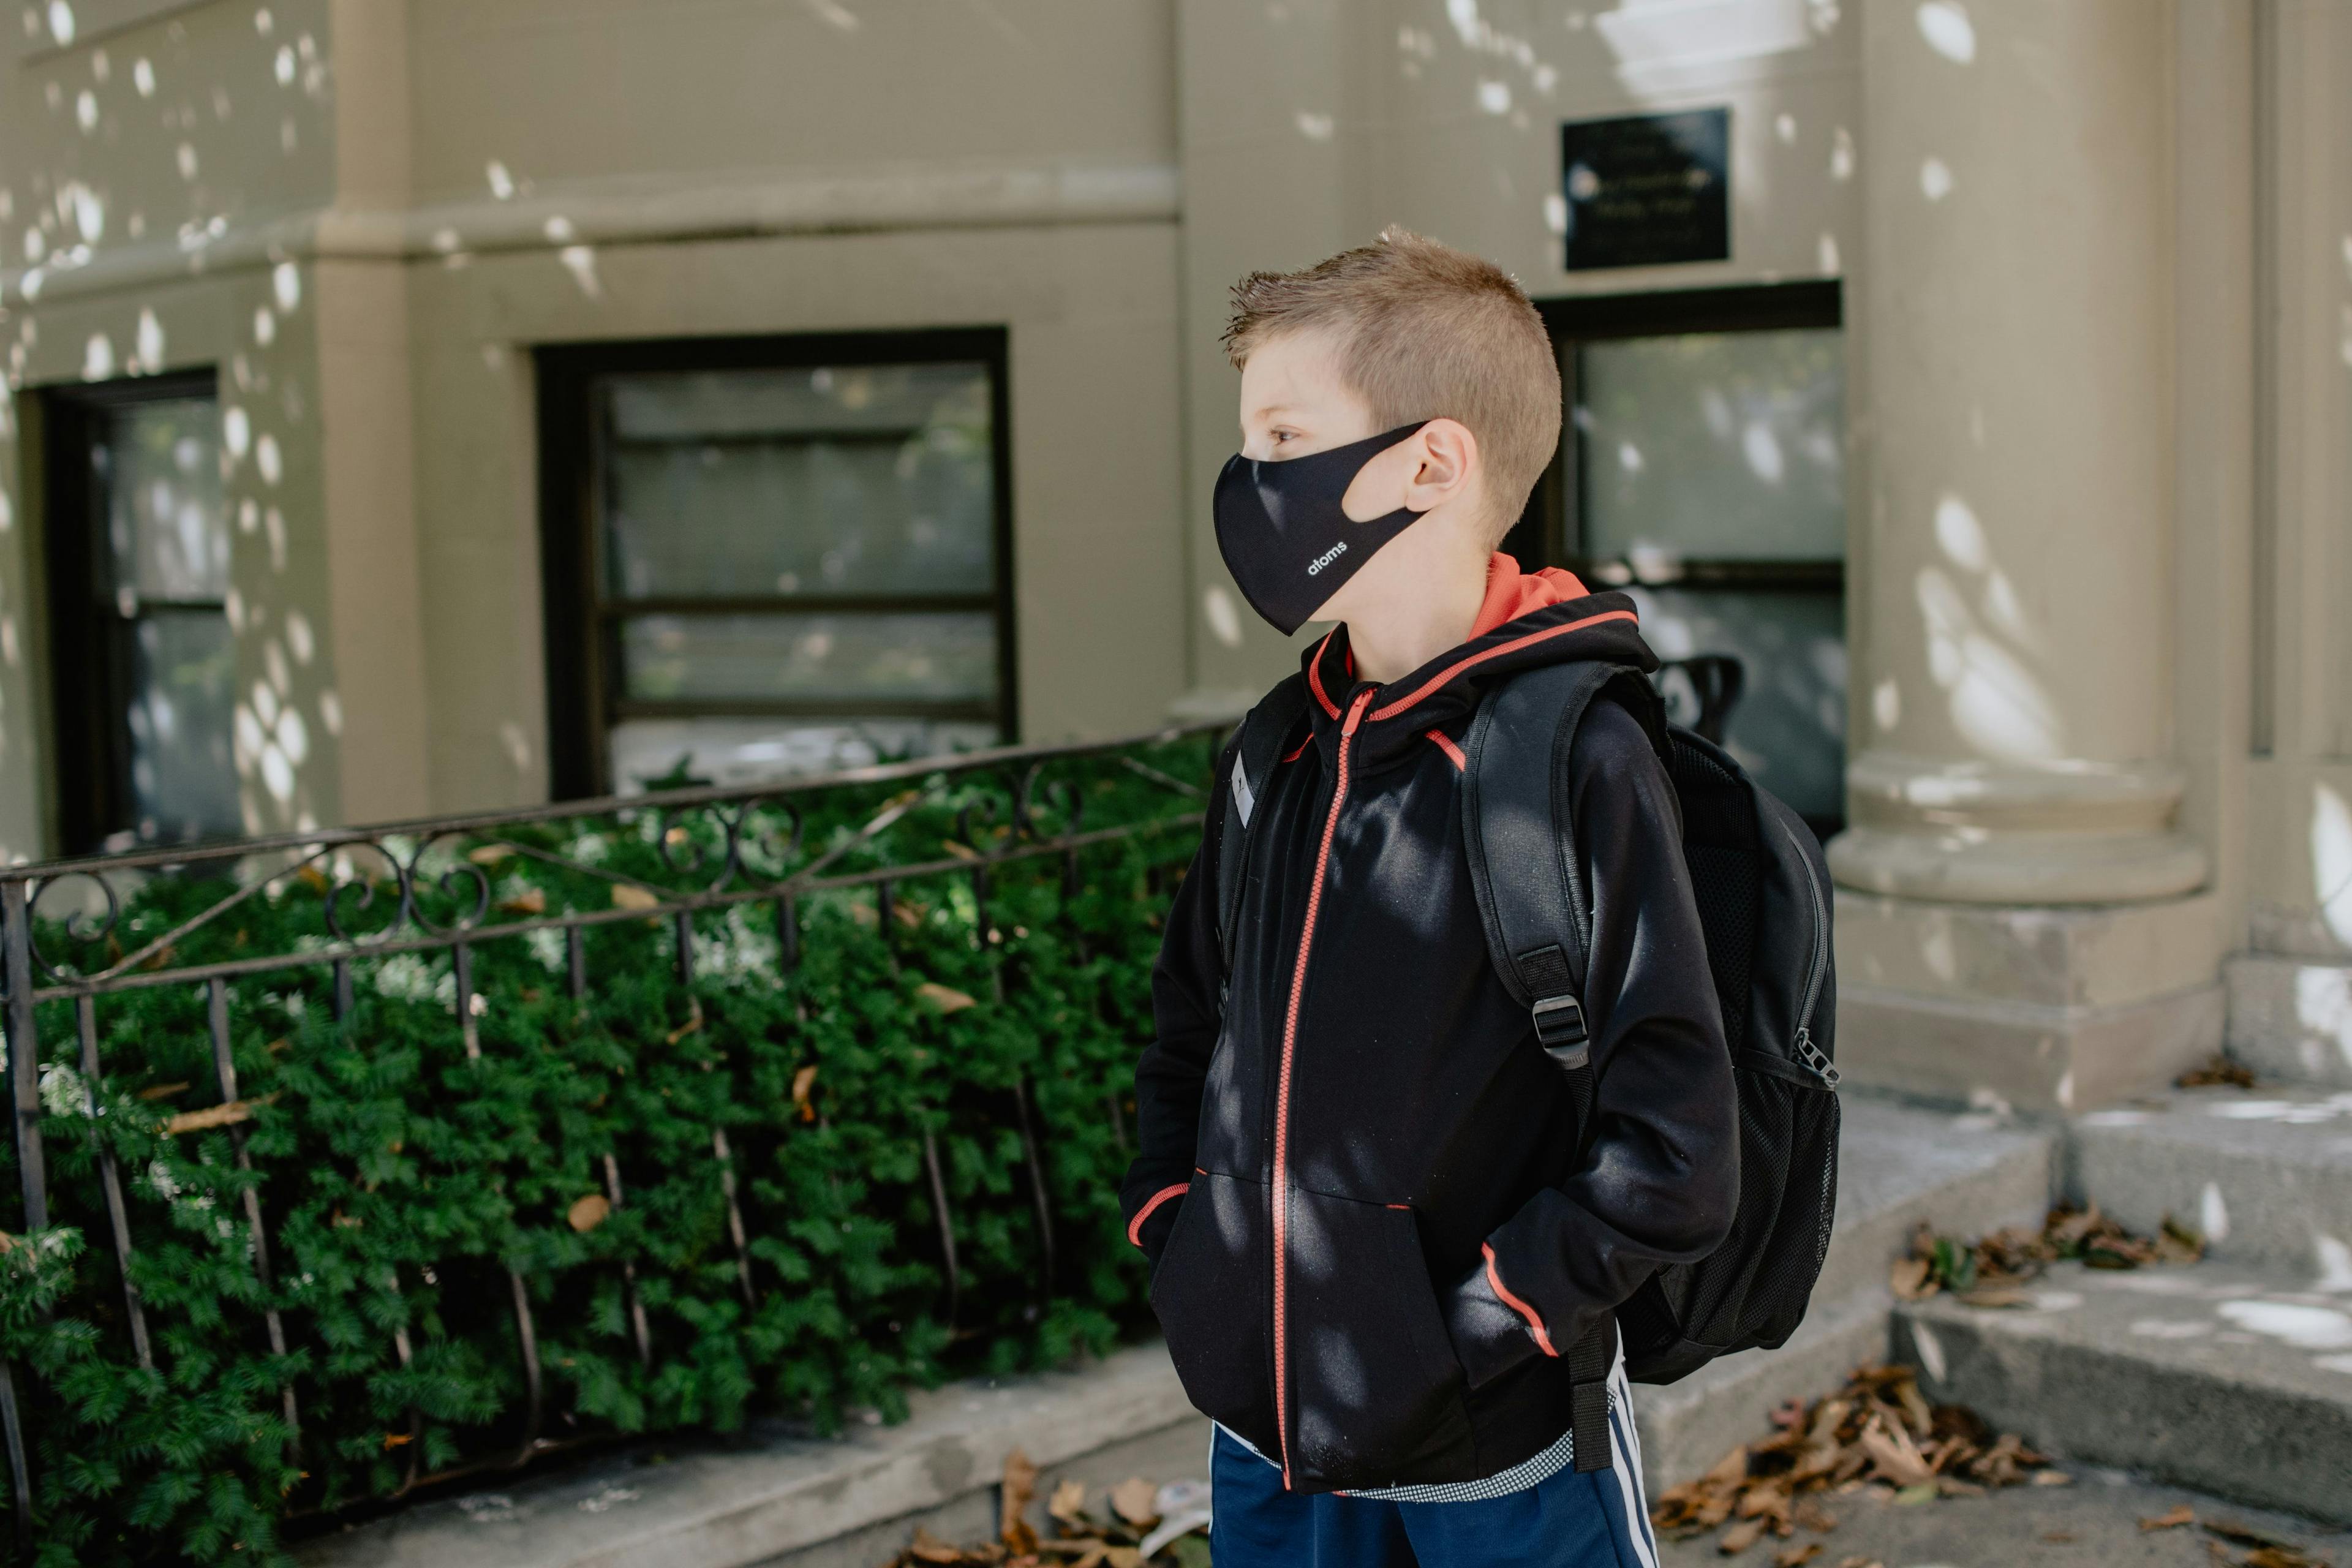 Wearing Masks Didn’t Increase Face Touching Among Kids in Simulated School Study